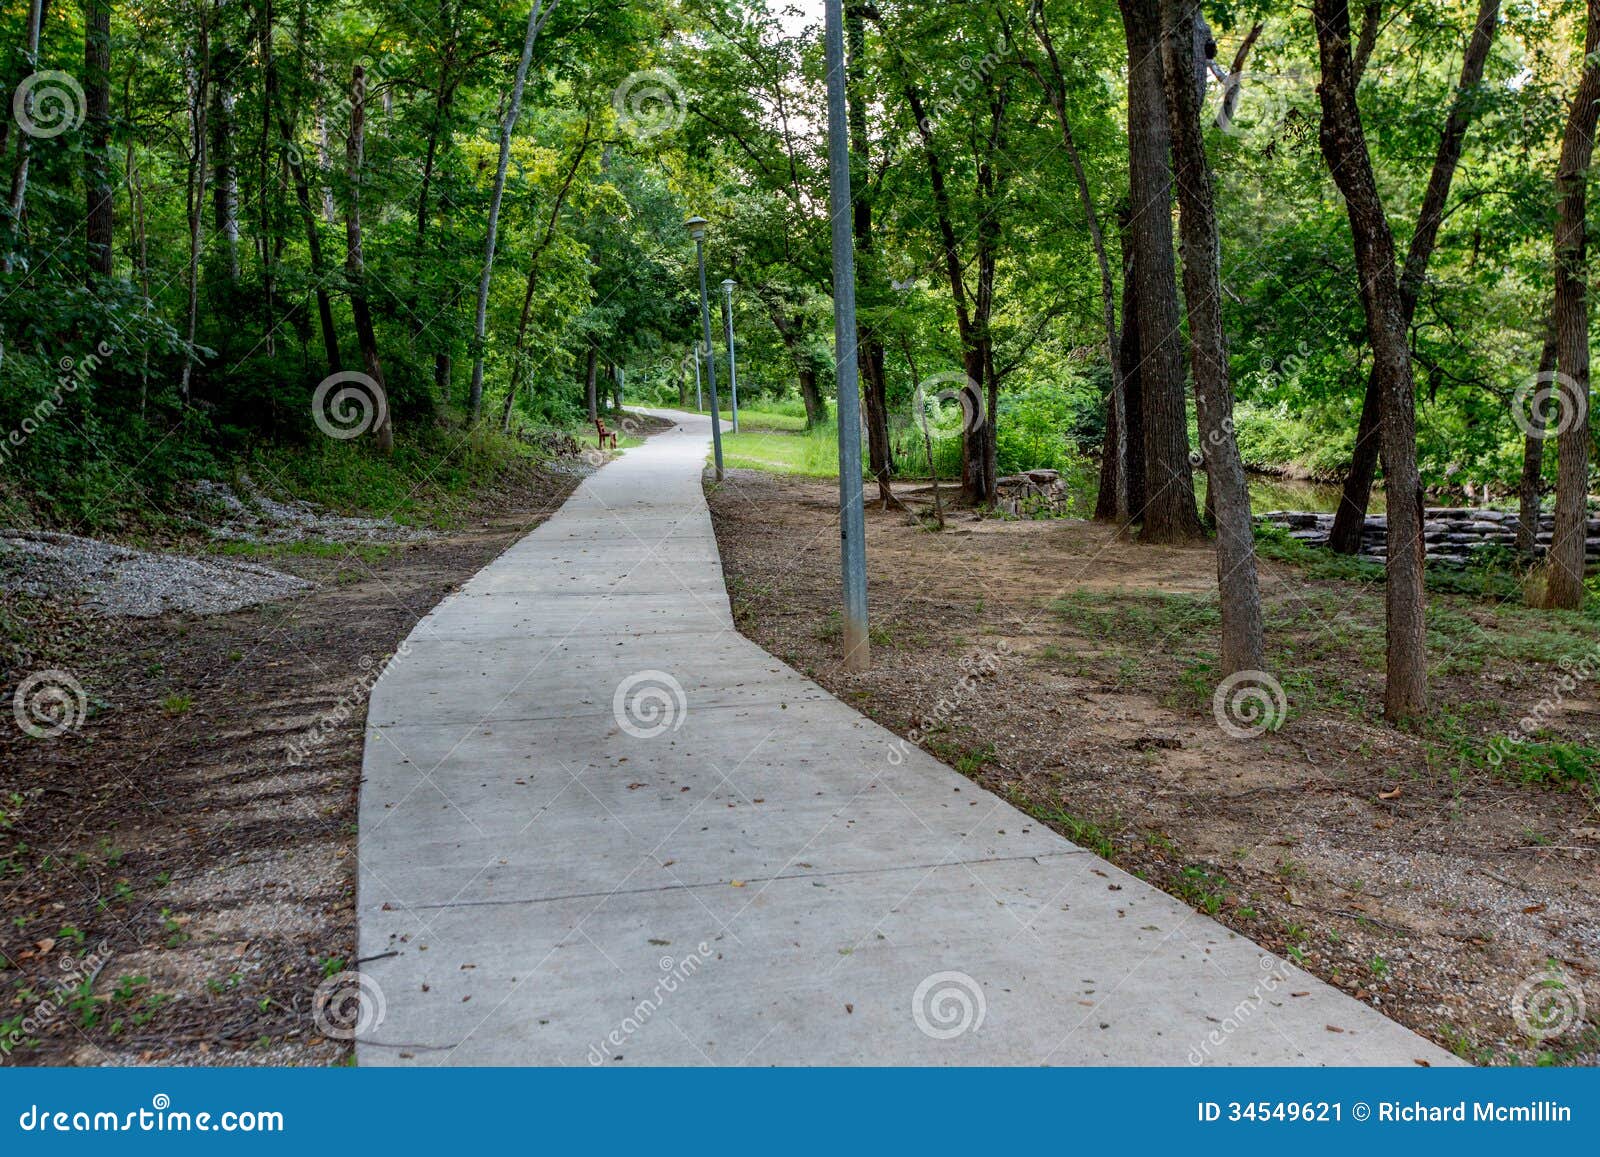 a tranquil spring or summer wooded nature trail or outdoor scene